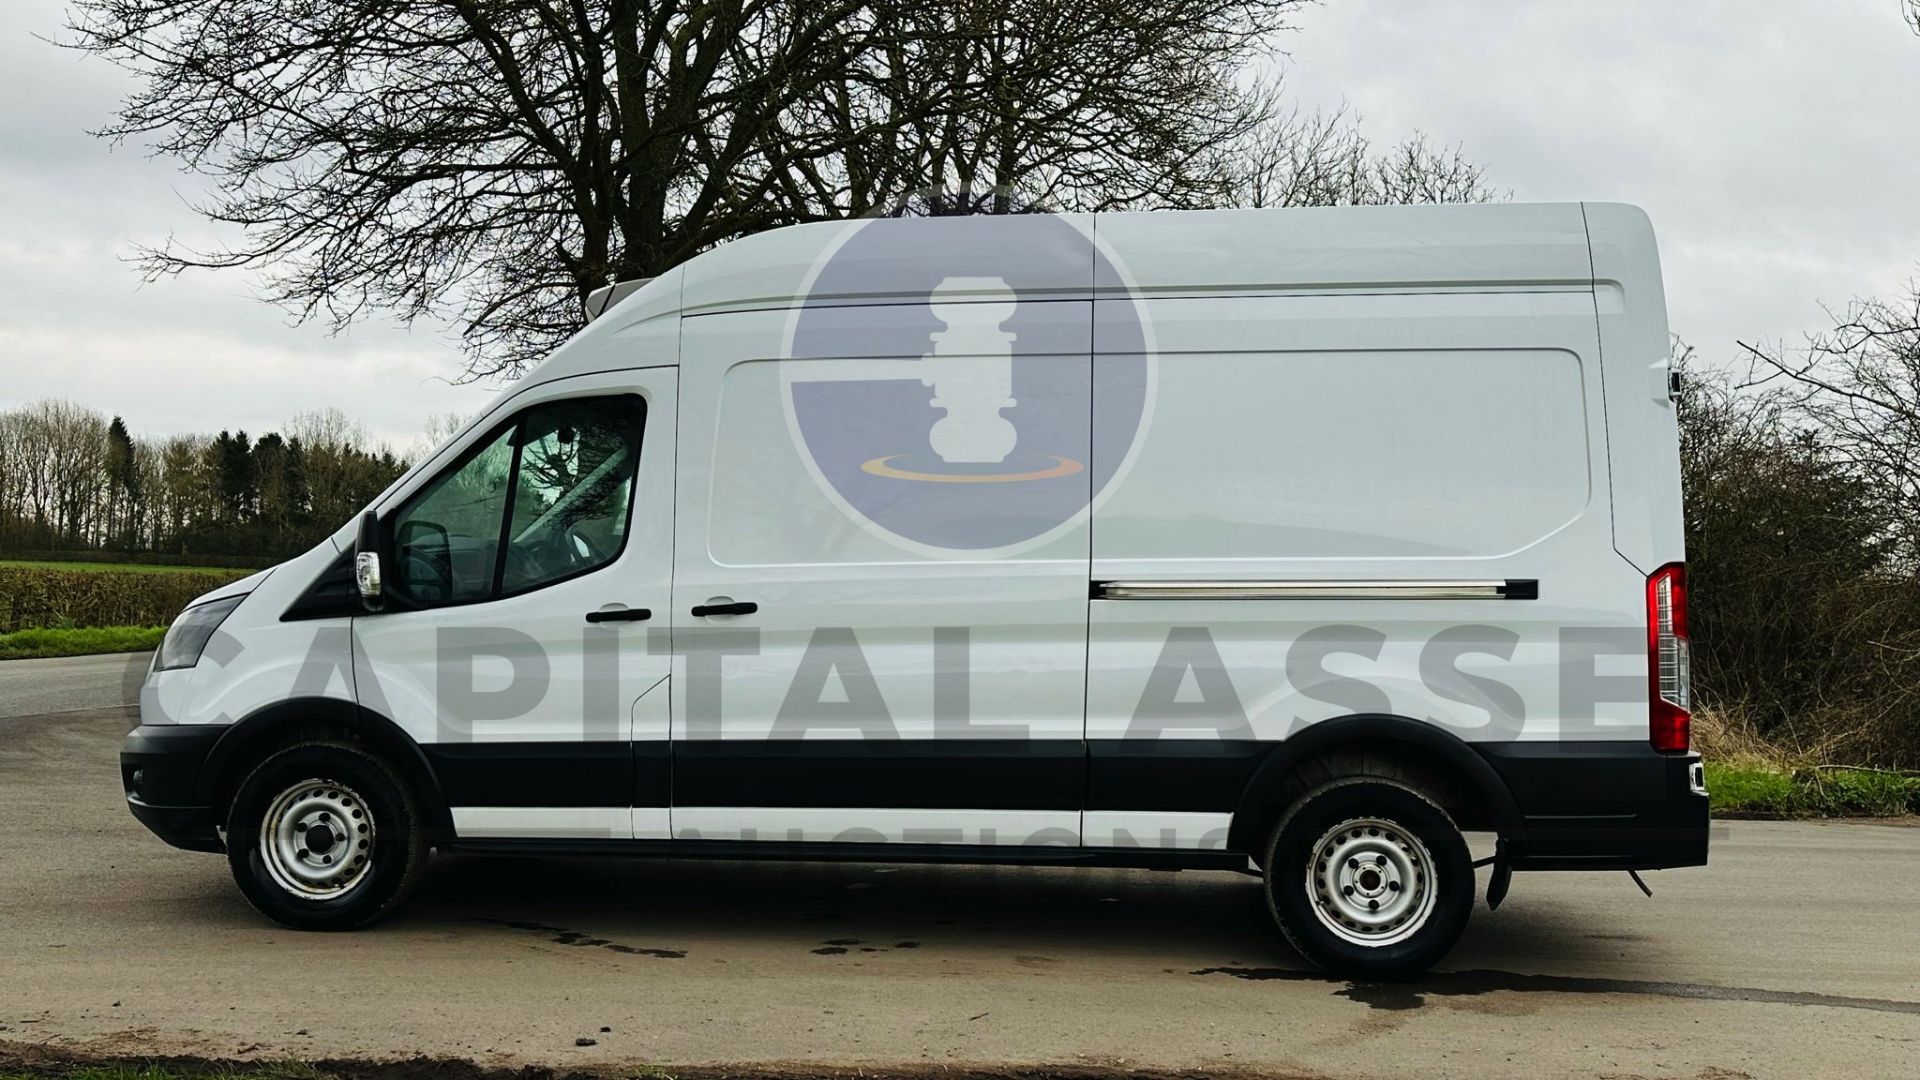 (On Sale) FORD TRANSIT 130 T350 *LWB - REFRIGERATED VAN* (2019 - EURO 6) 2.0 TDCI - 6 SPEED *EURO 6* - Image 10 of 39